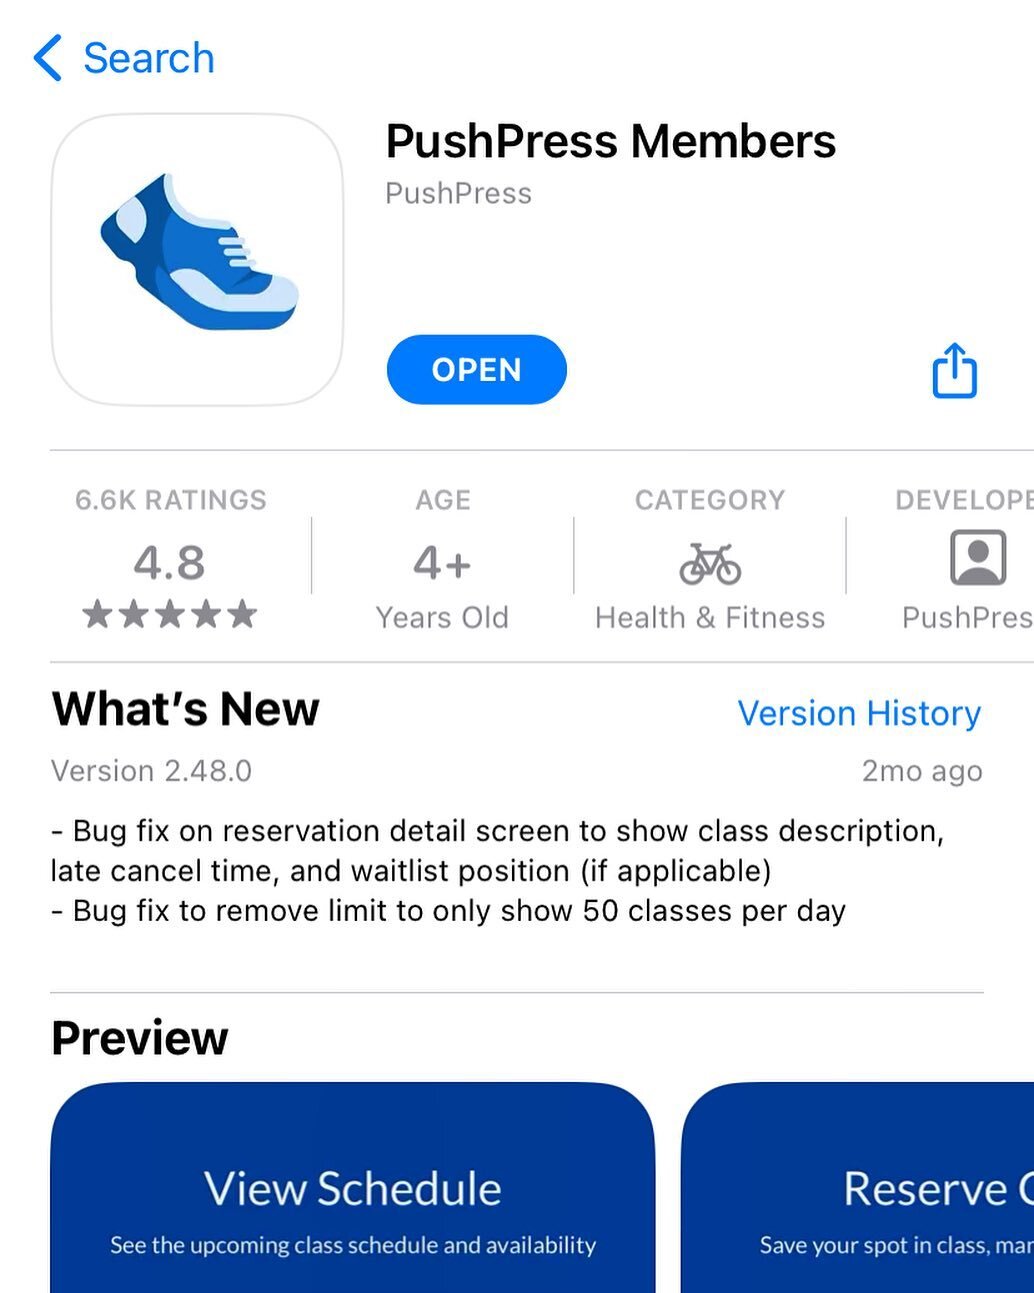 ATTN Imperial Members! 

Keep an eye on your email for important action items to get your info into our new Push Press system. After that you&rsquo;ll need to download the app!

**Don&rsquo;t miss the bus! Go Live in the new app for RSVPing to classe